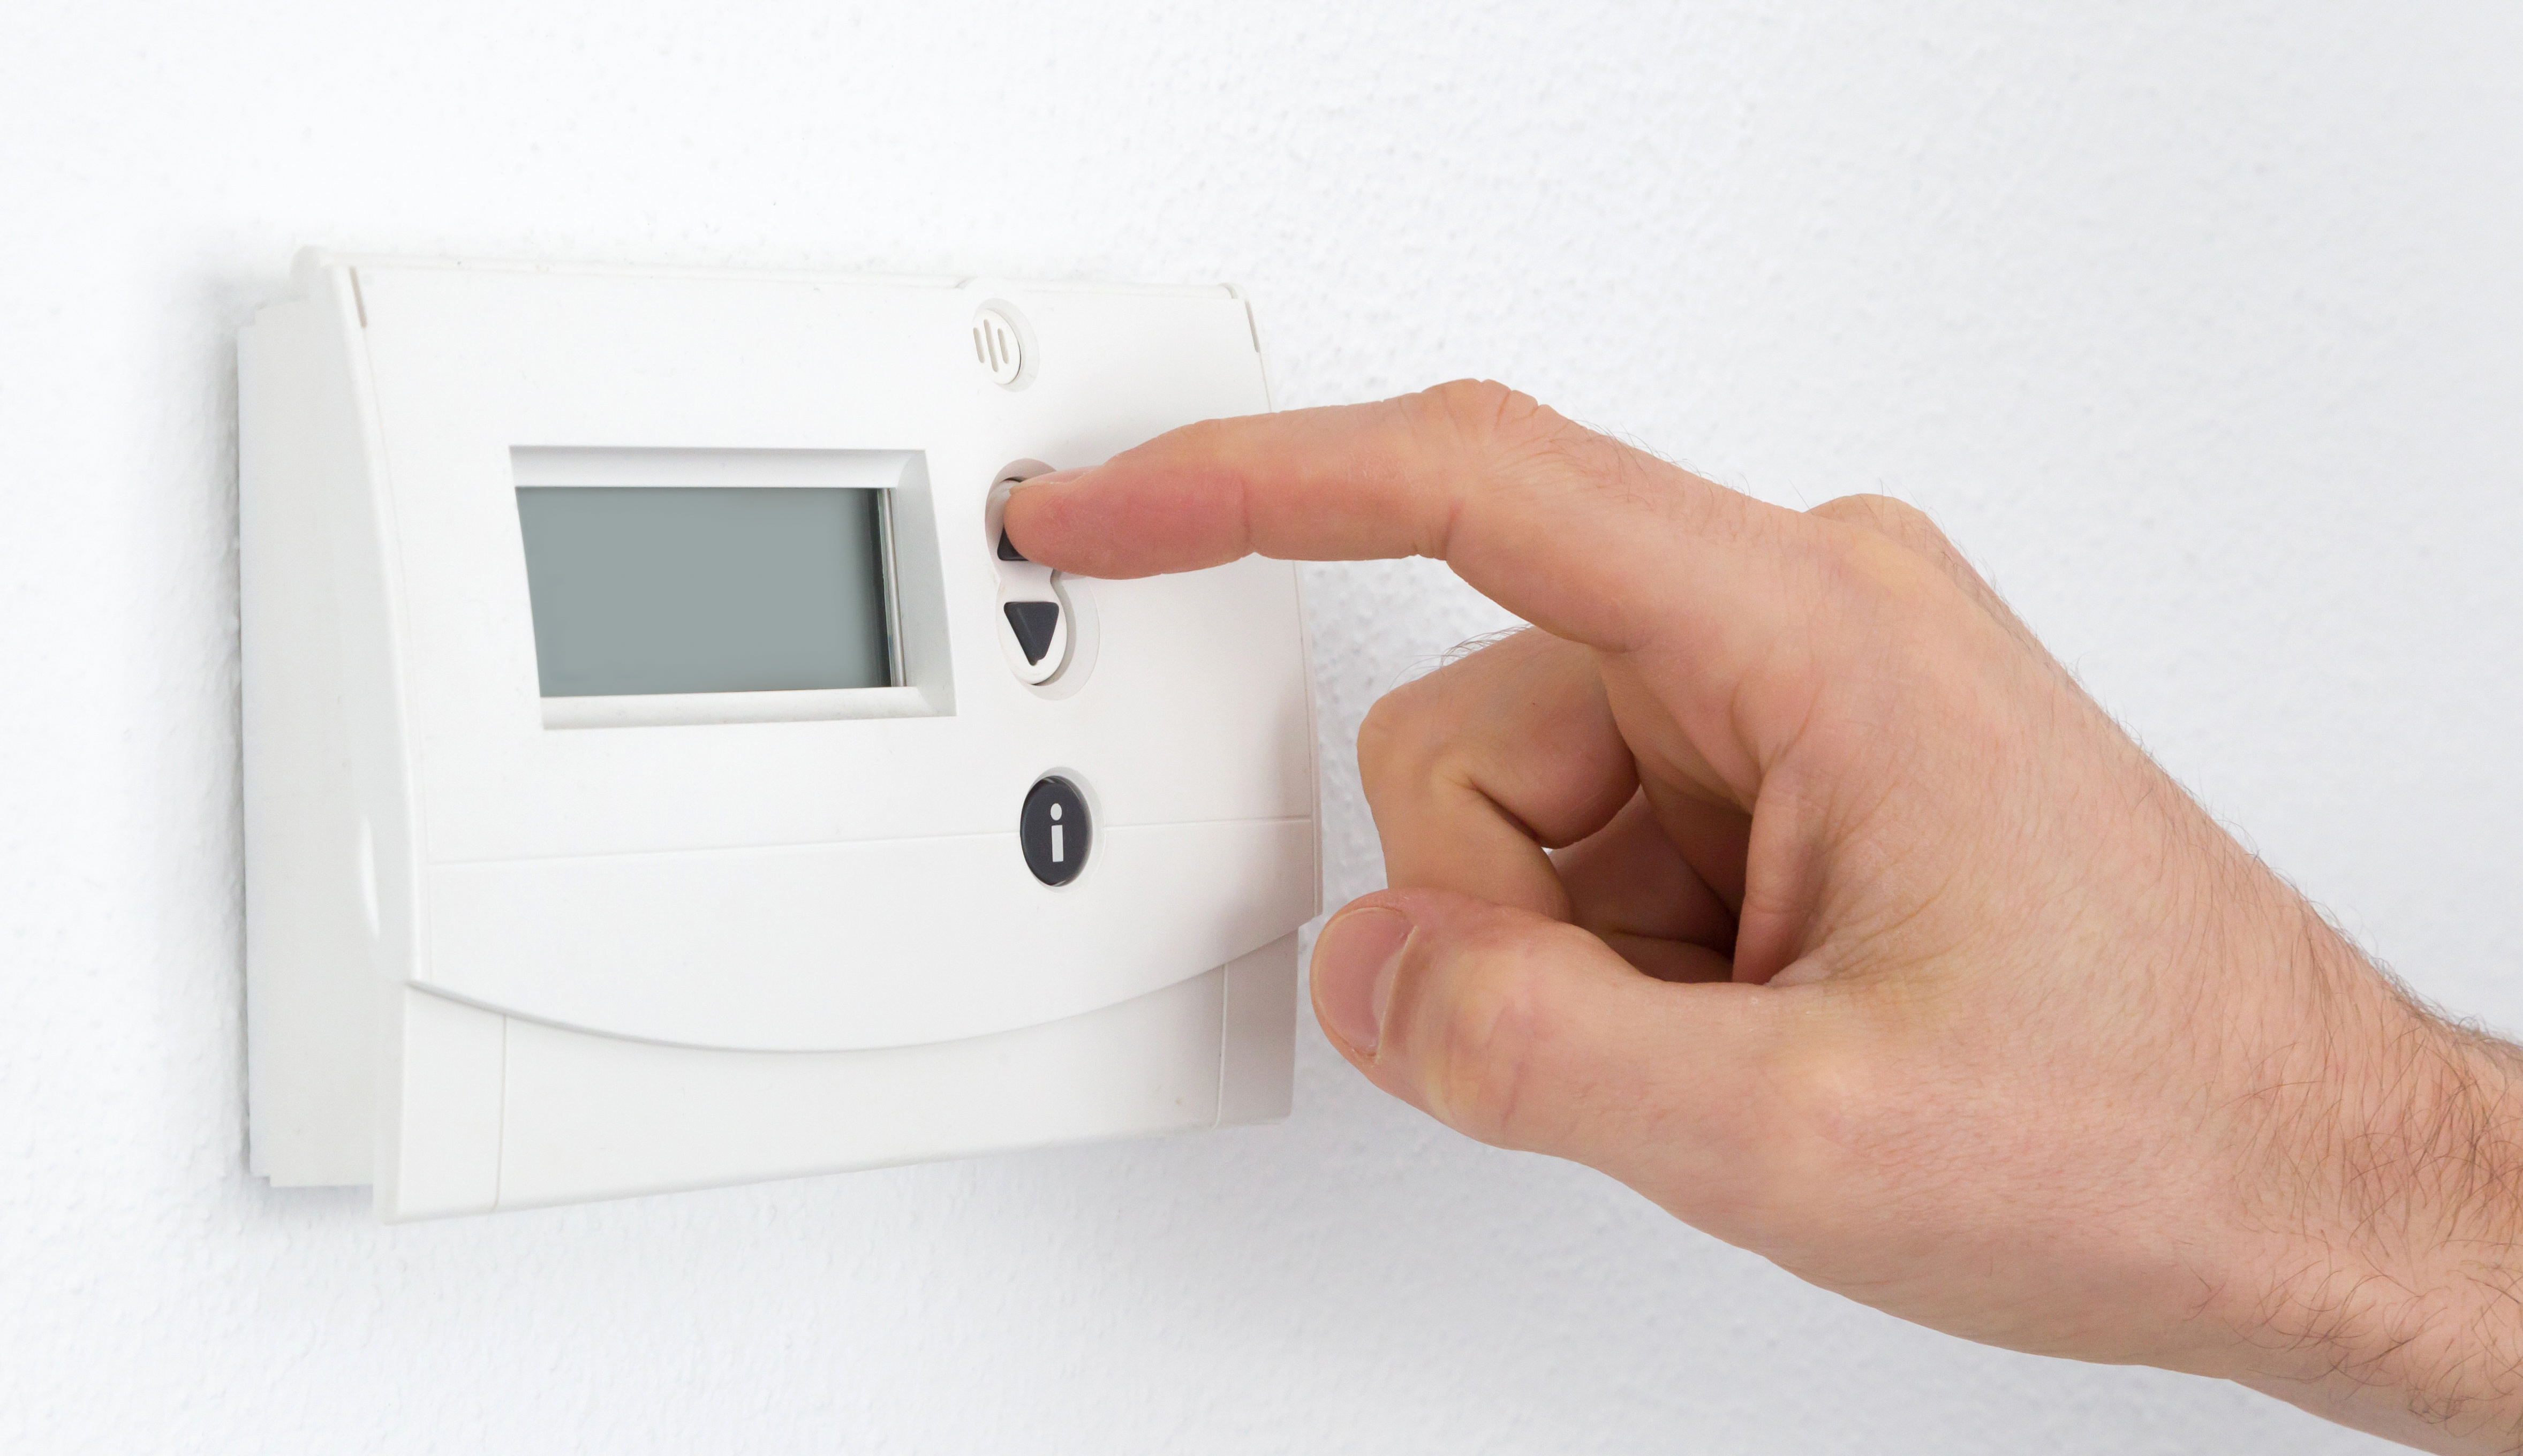 Close-up of a hand adjusting a digital thermostat on a white wall.